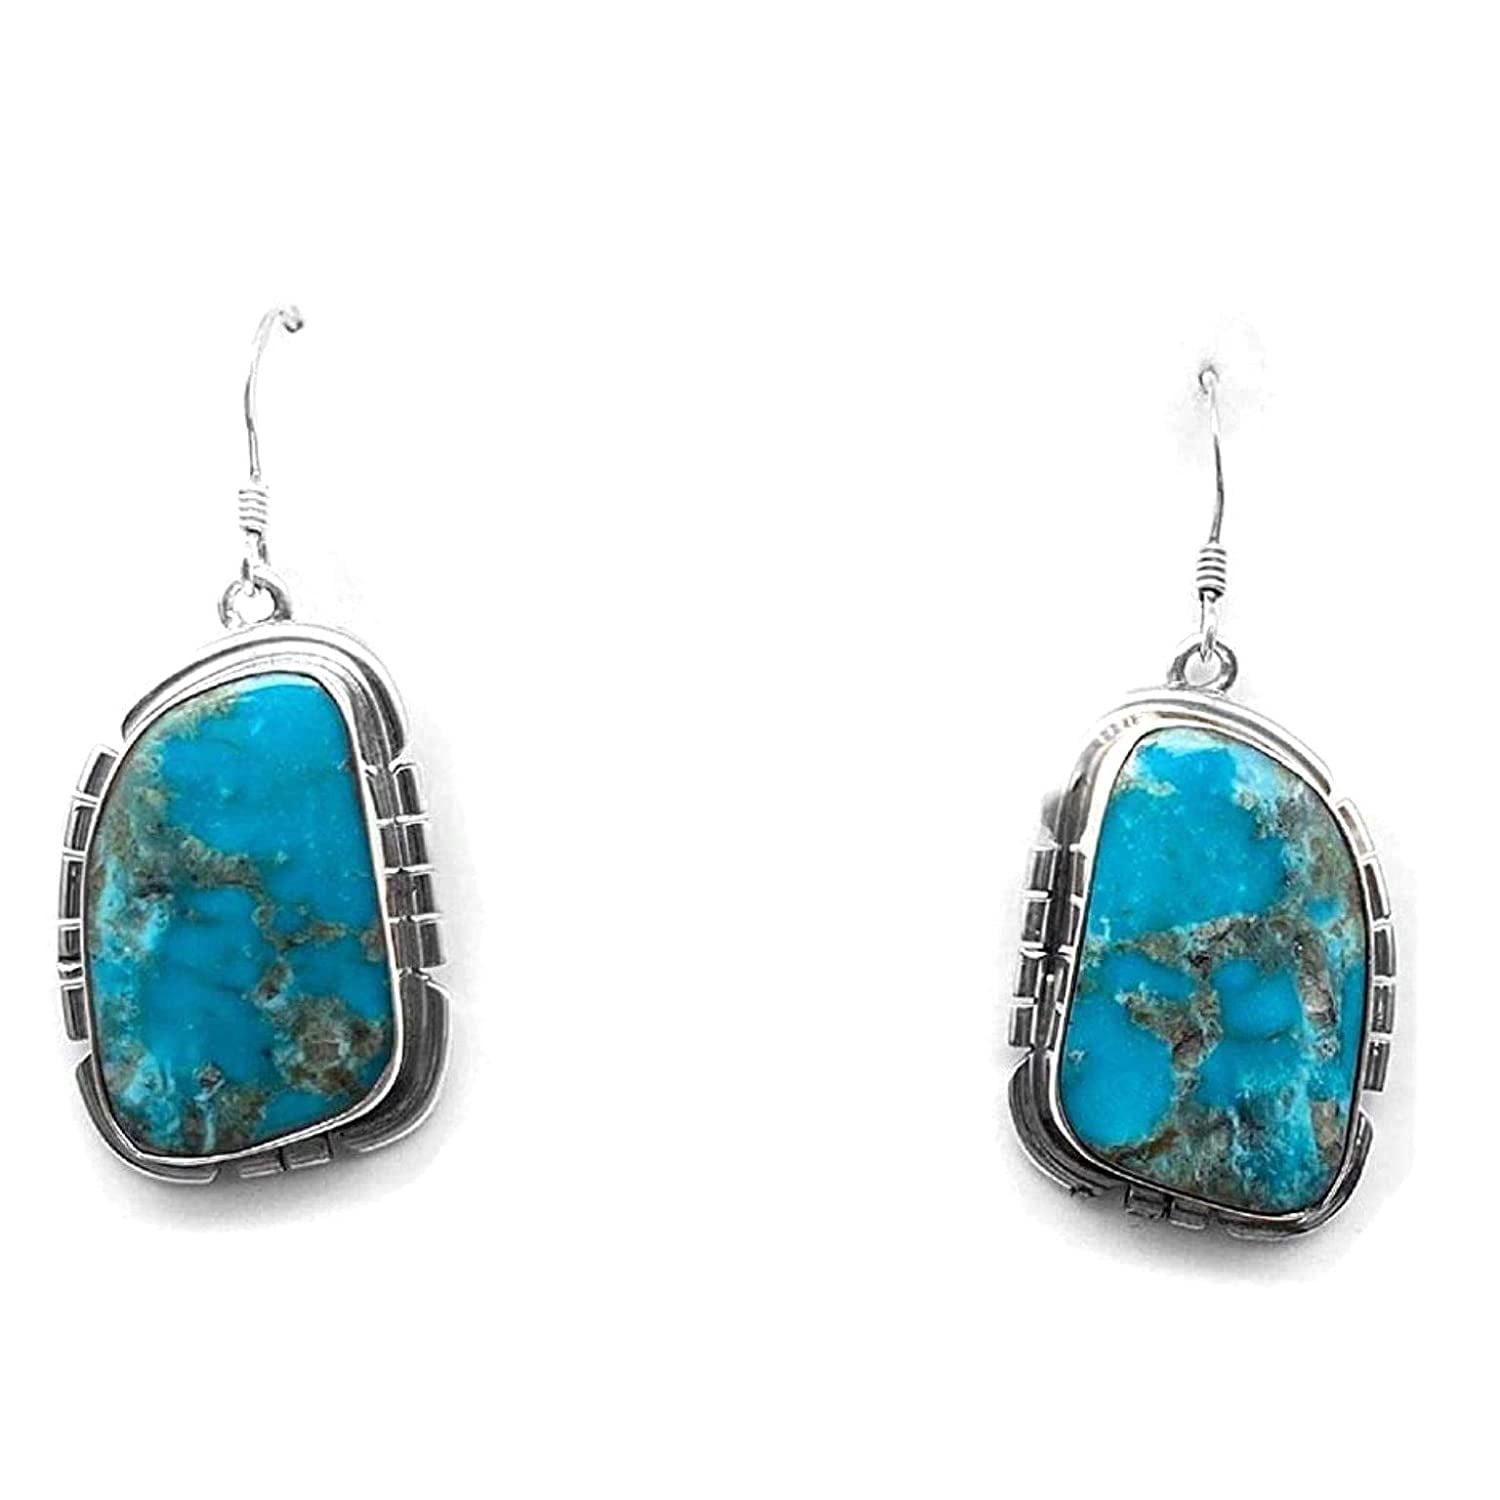 925 Sterling Silver Genuine Turquoise Chips Earrings Gift Bag Free P&P 